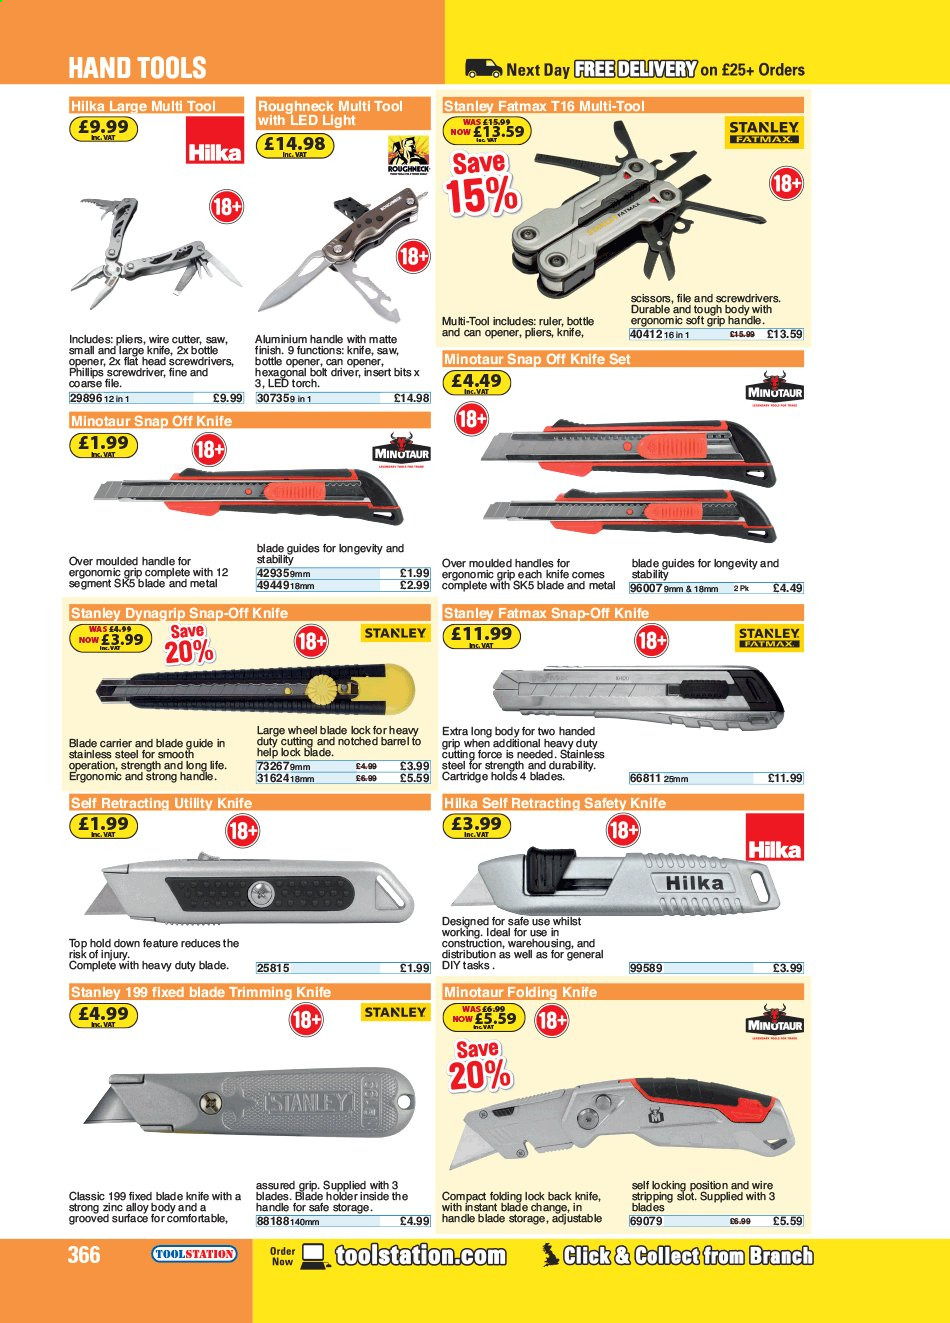 thumbnail - Toolstation offer  - Sales products - LED light, Stanley, saw, holder, screwdriver, pliers, hand tools, utility knife. Page 366.